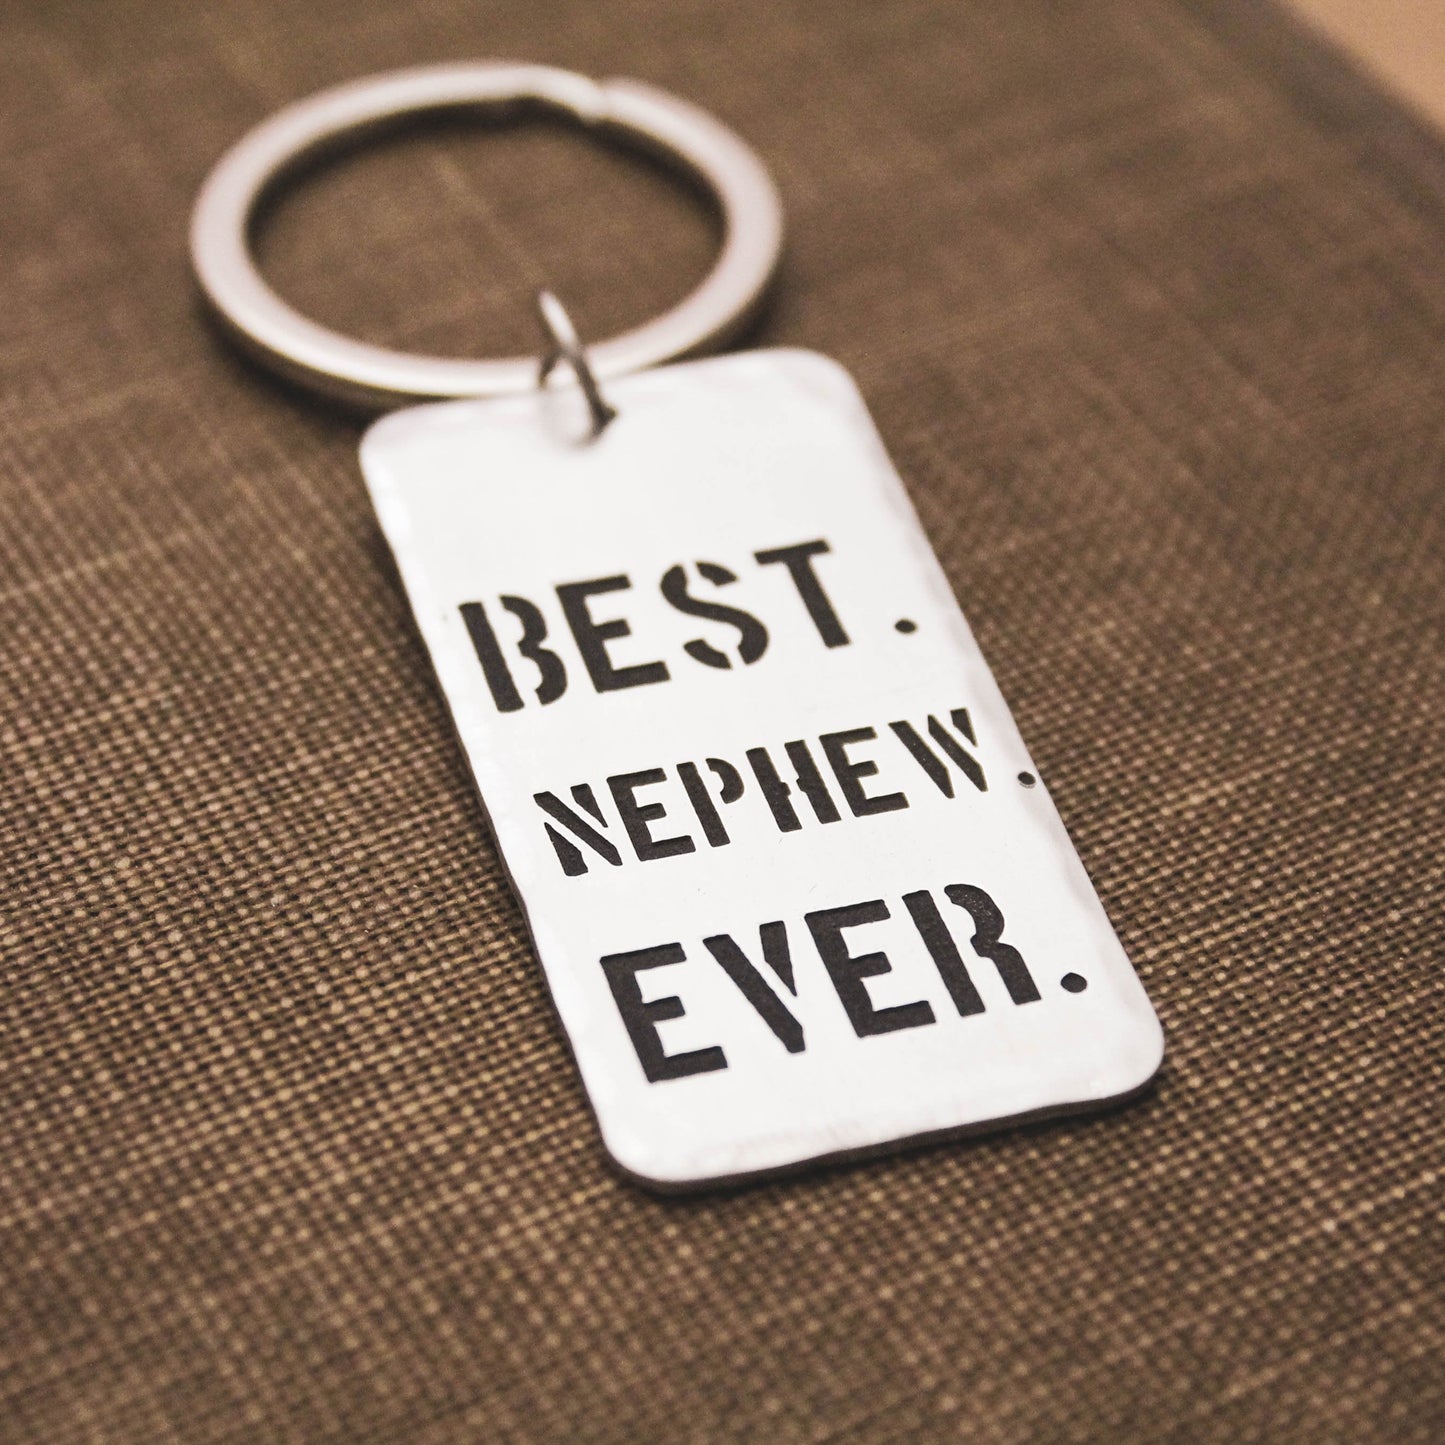 Best Nephew Ever Keychain, Personalized Key Chain, Gifts for Nephews, Gifts for Him, Handstamped, Personalized Gift, Nephew Gift Keychain